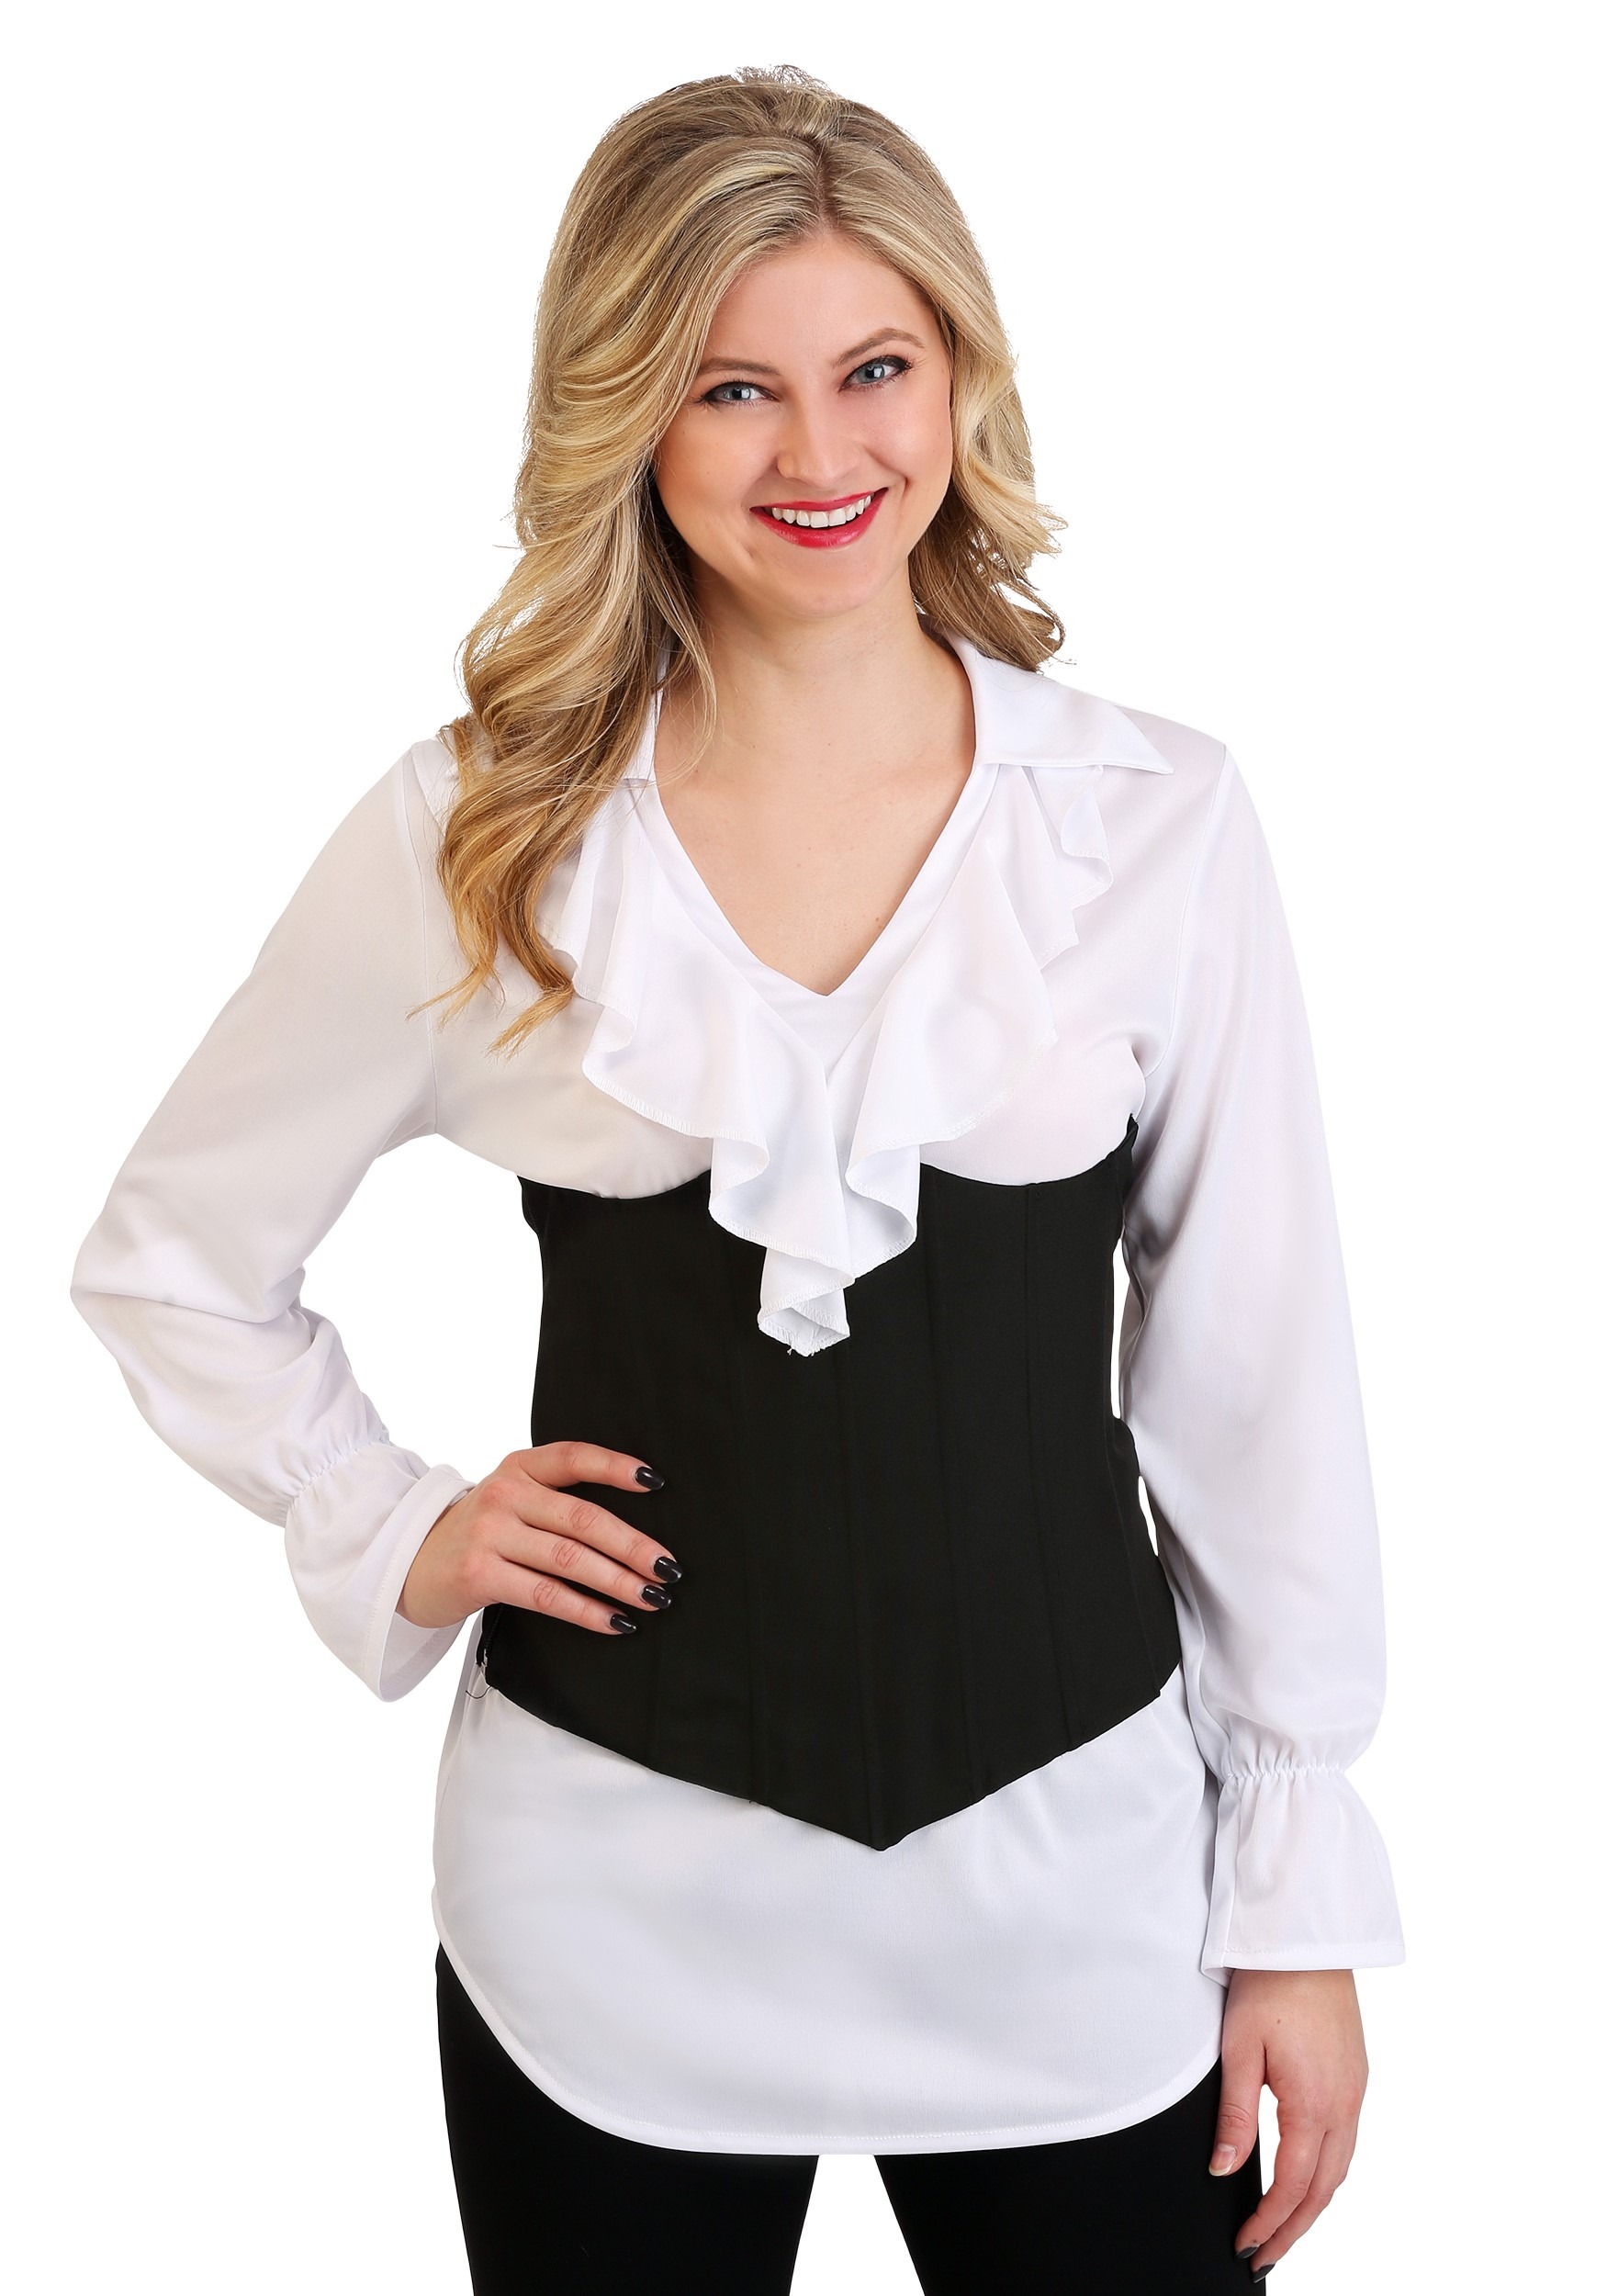 Adult Ruffled Pirate Blouse